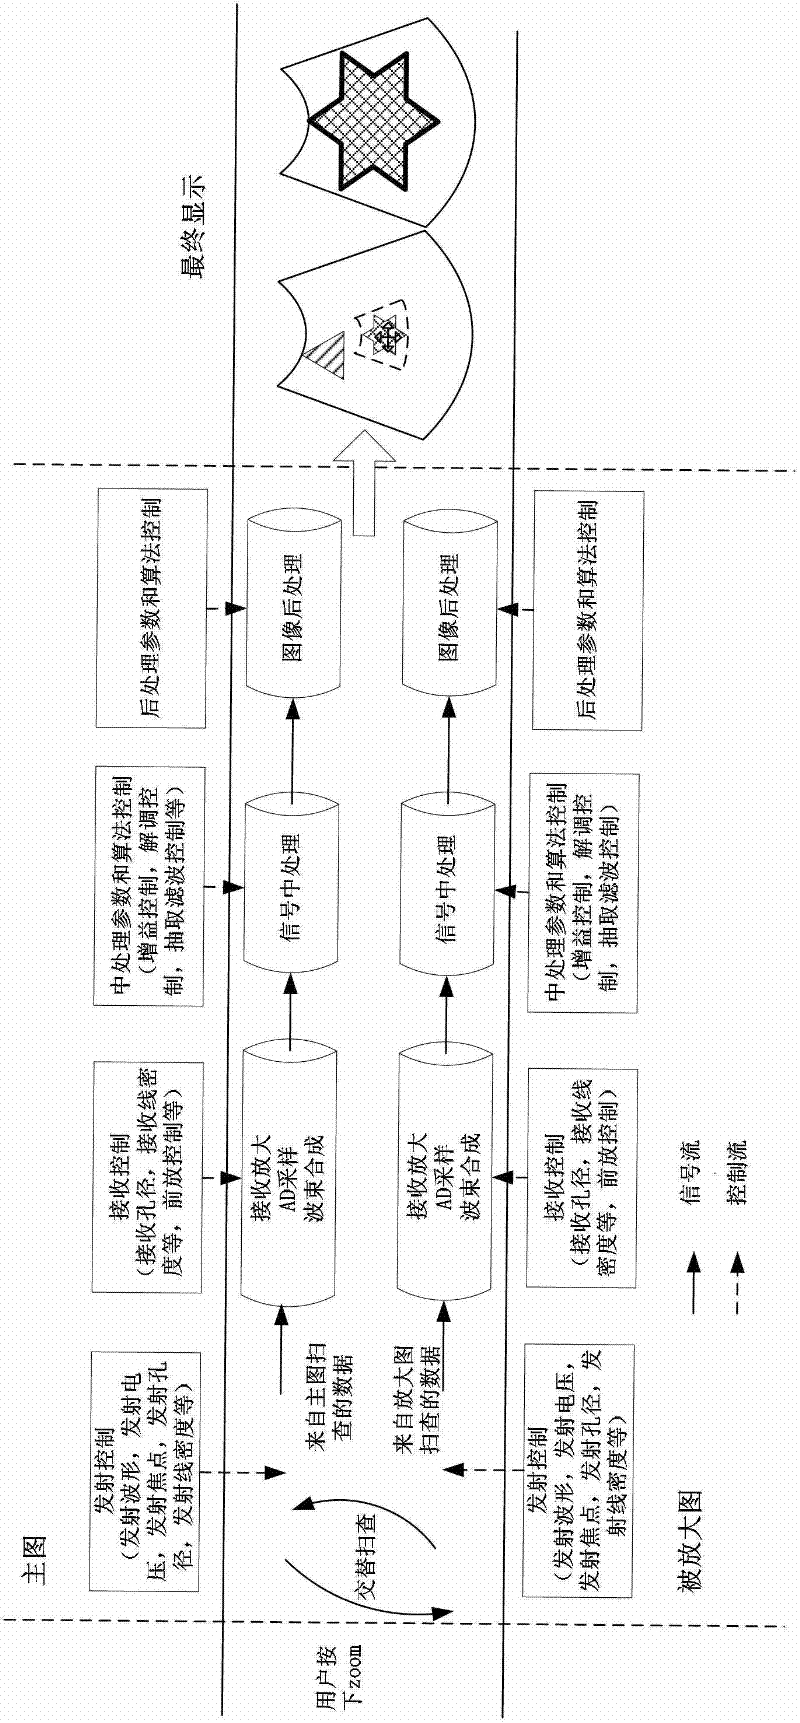 Real-time amplification method for ultrasonic image